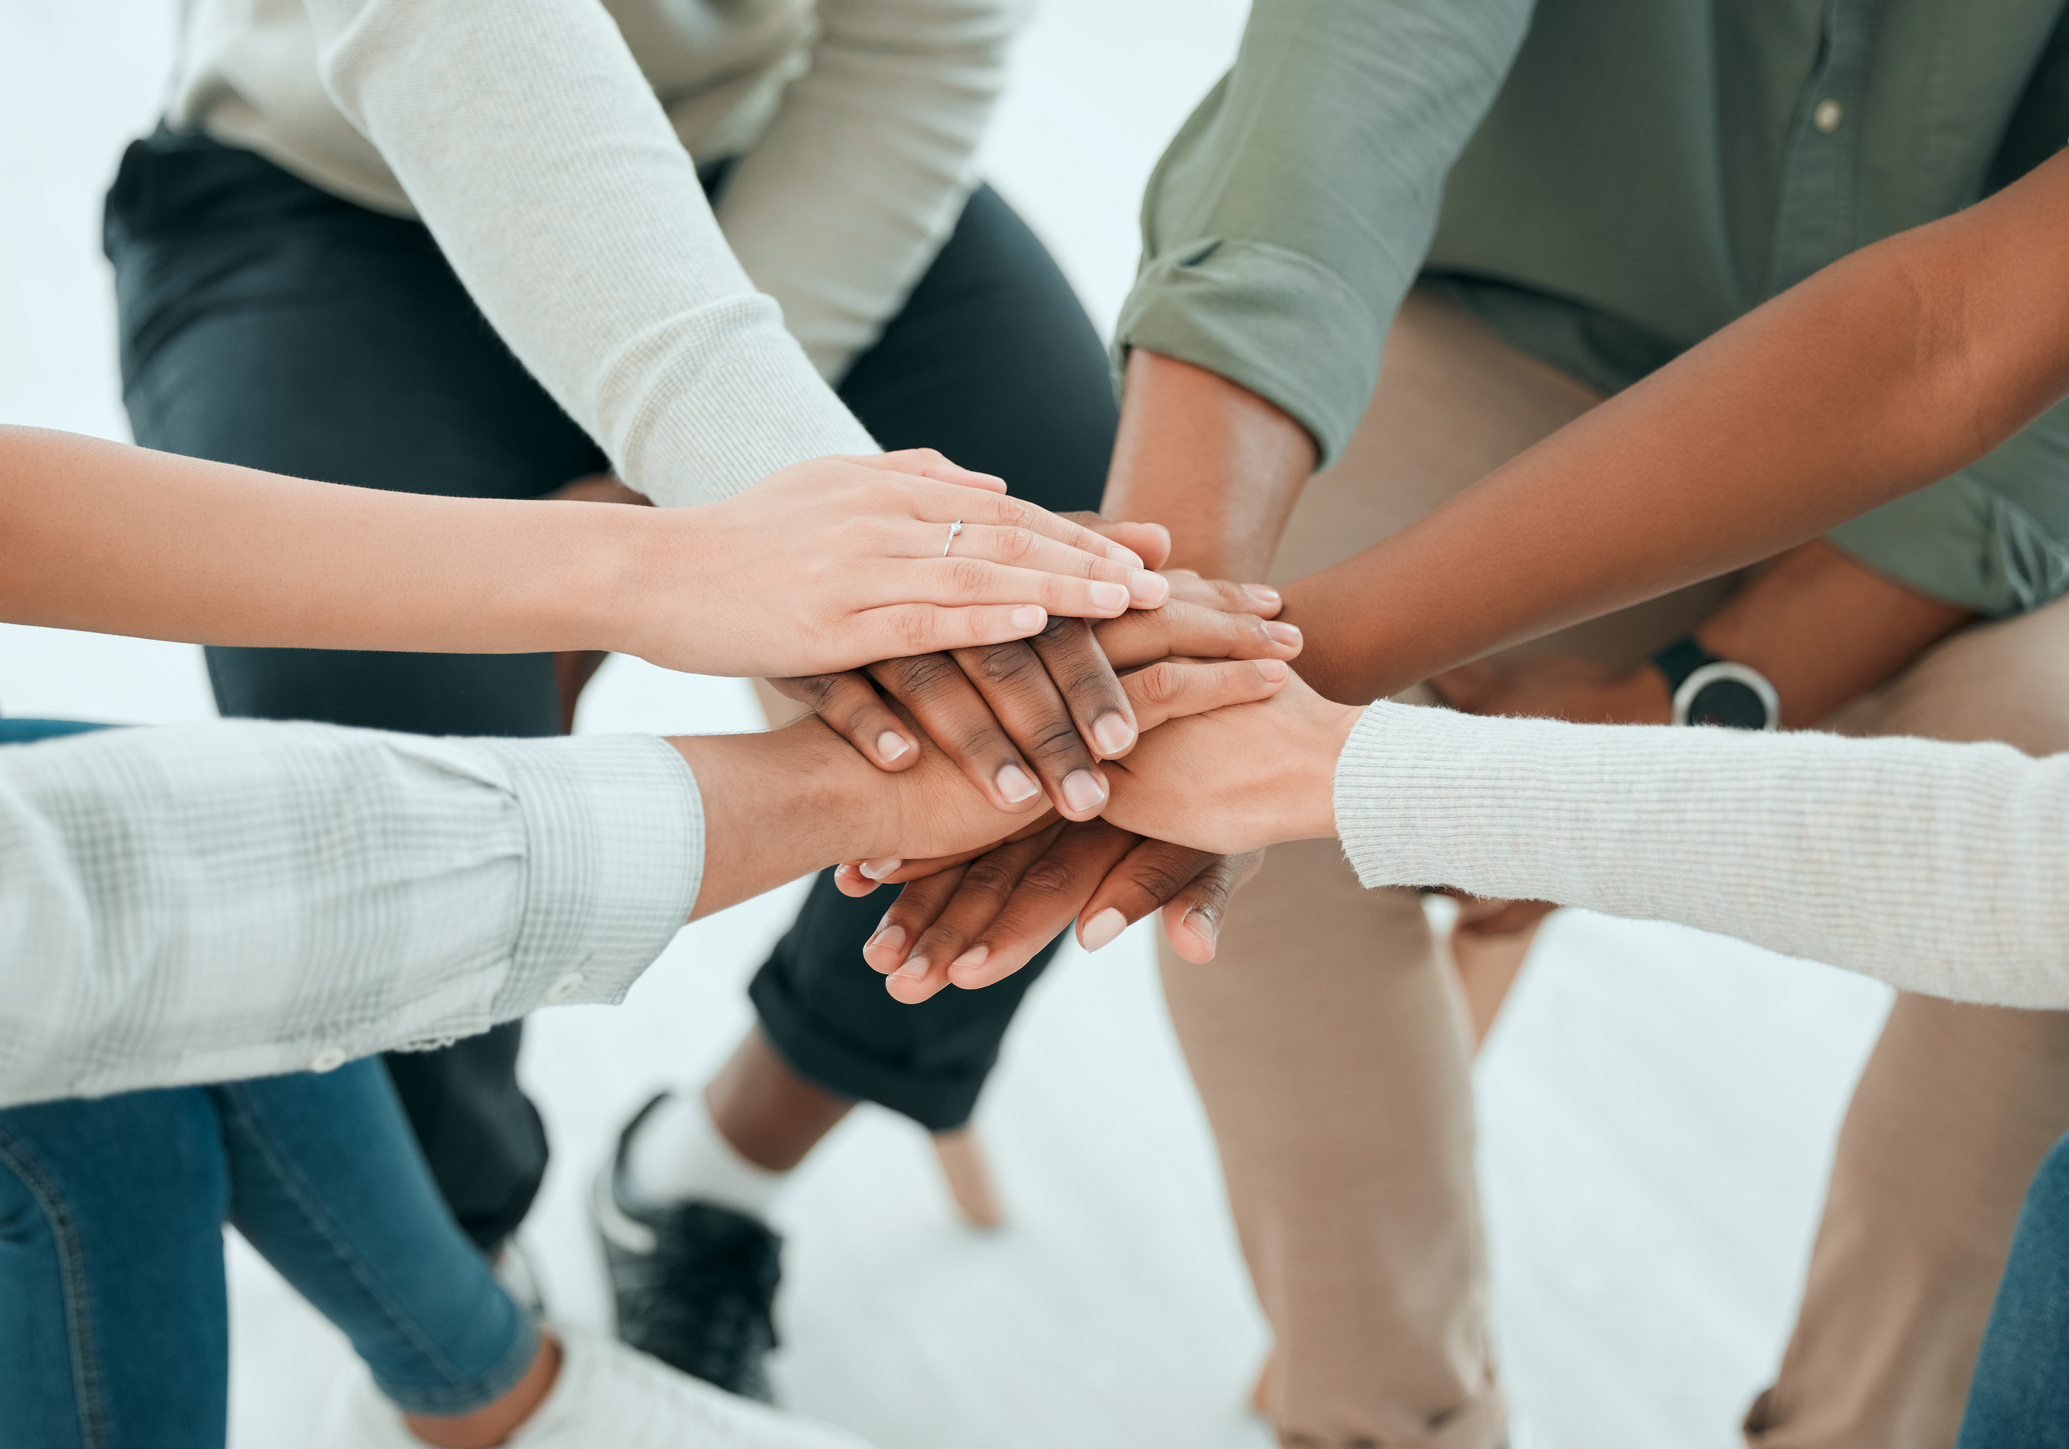 Multicultural people gathered in a circle with their hands stacked together showing unity.